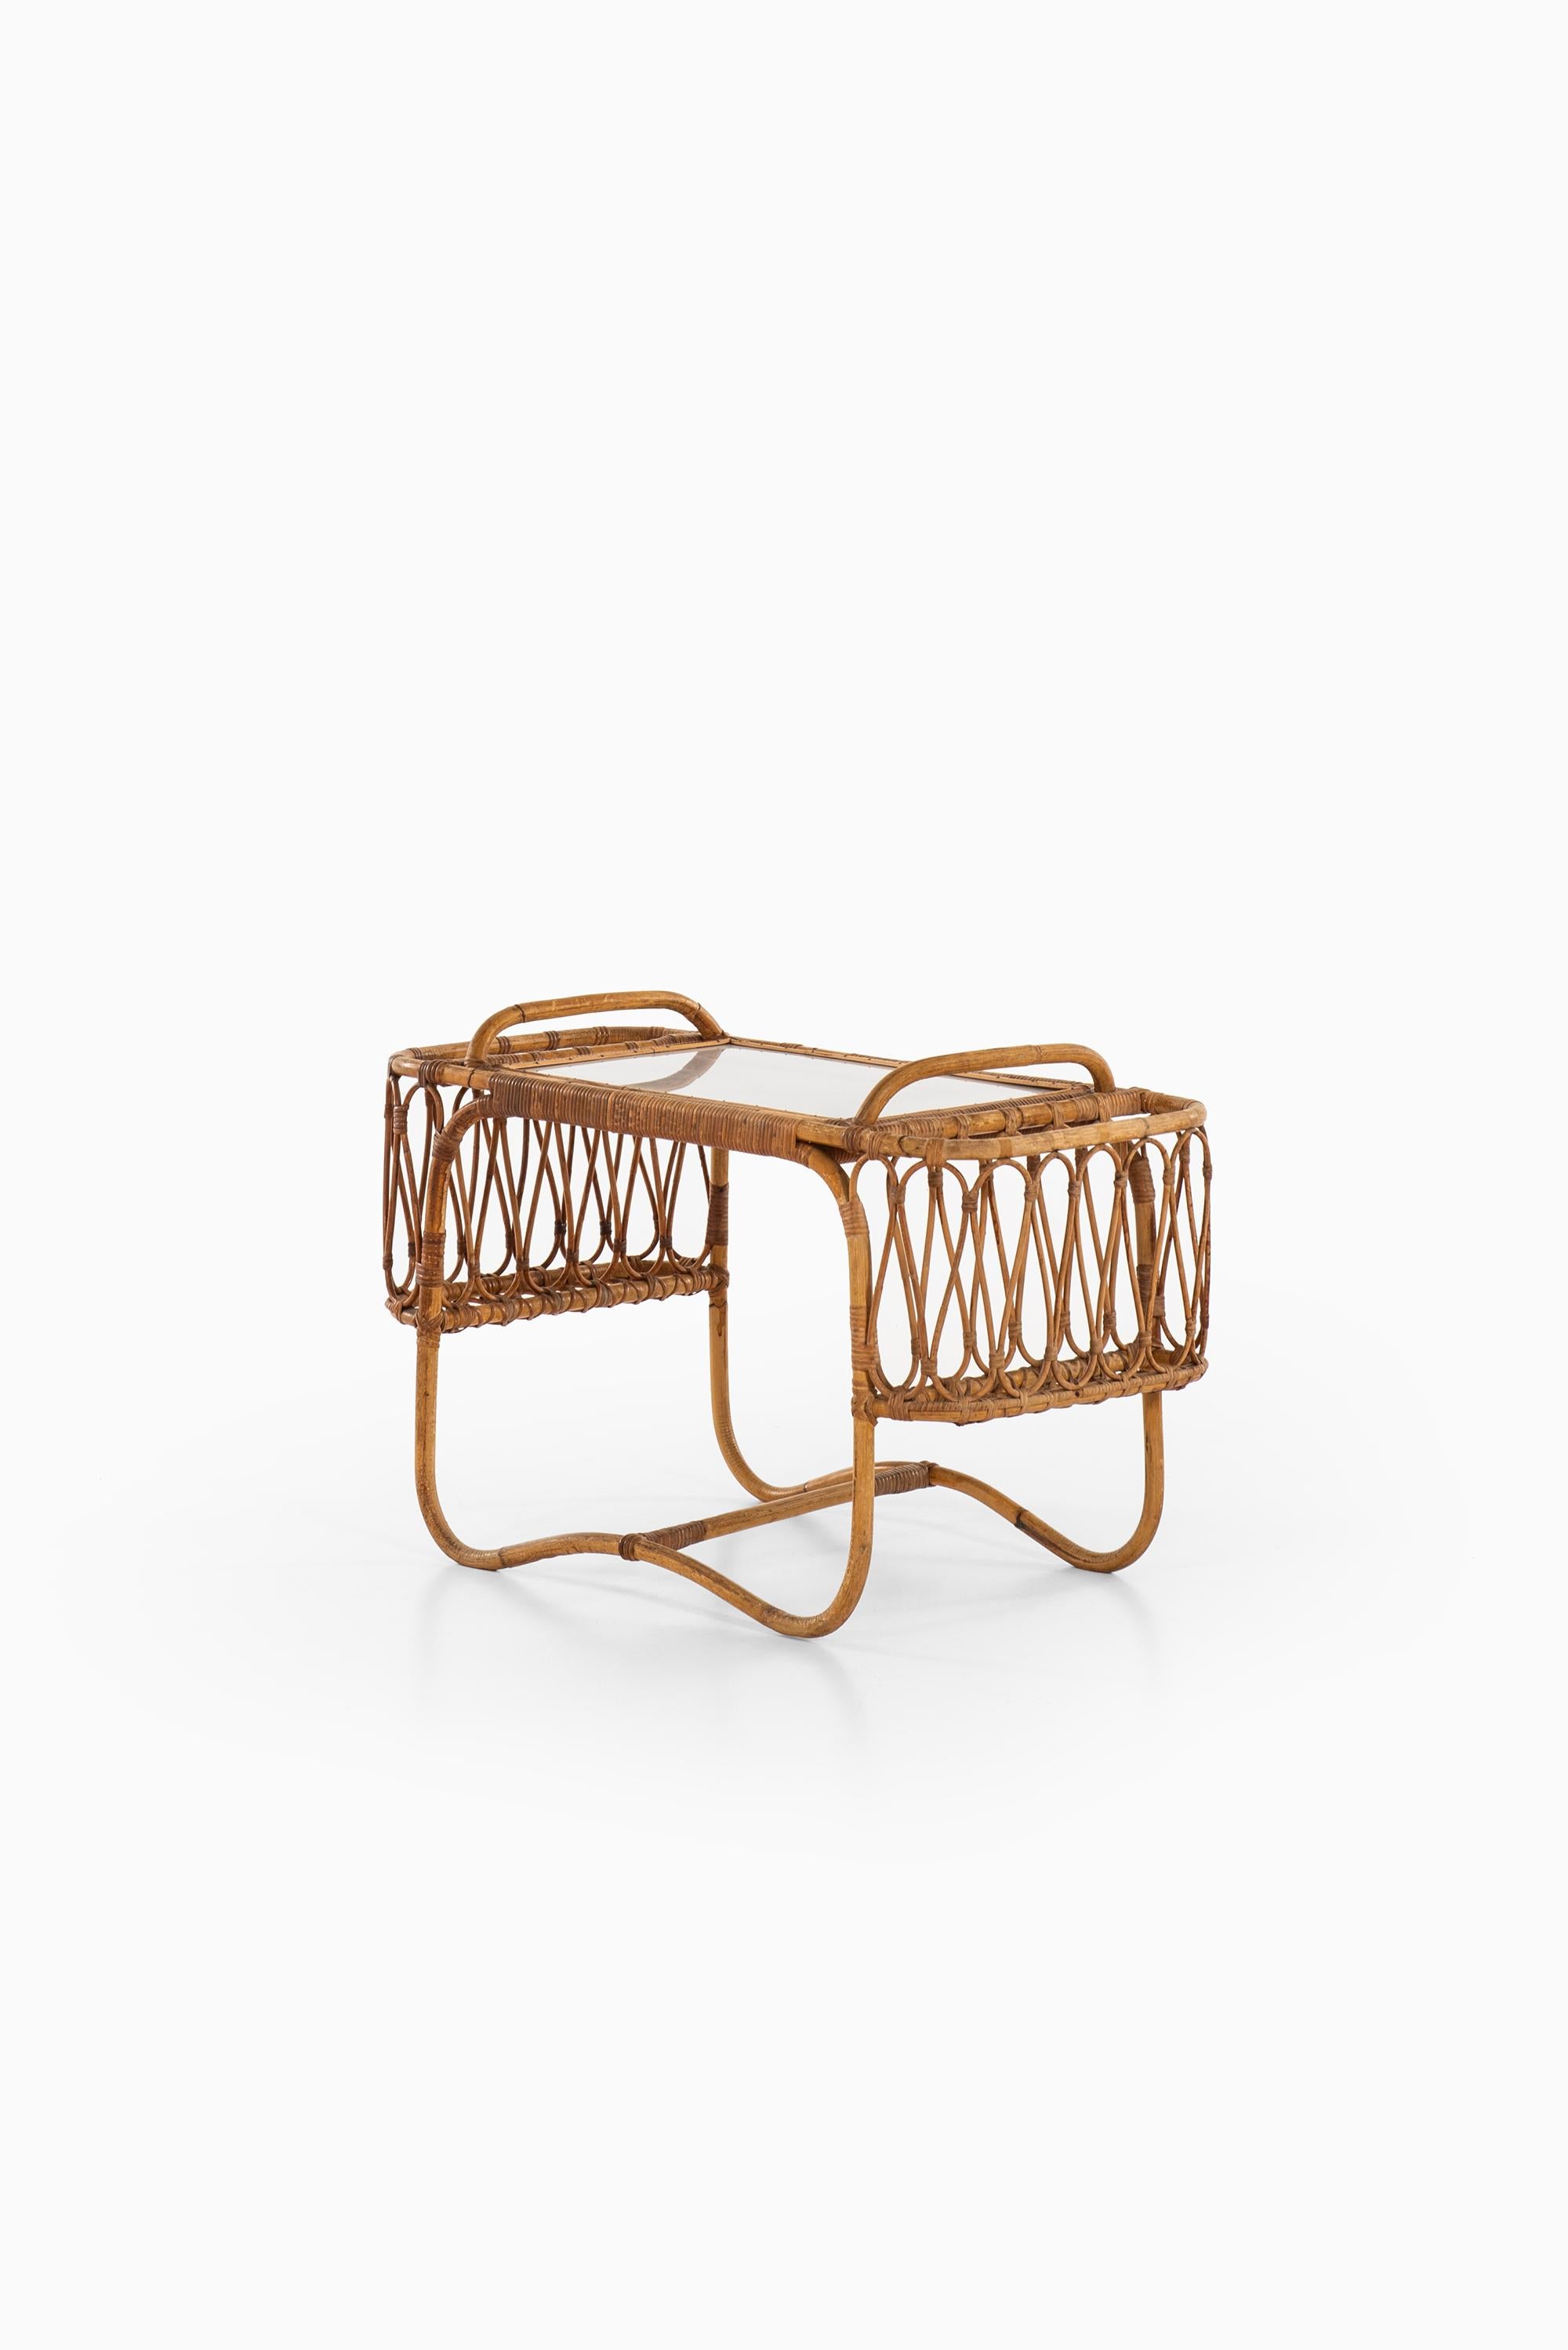 Tray Table in Rattan and Cane by E.V.A. Nissen & Co in Denmark 1